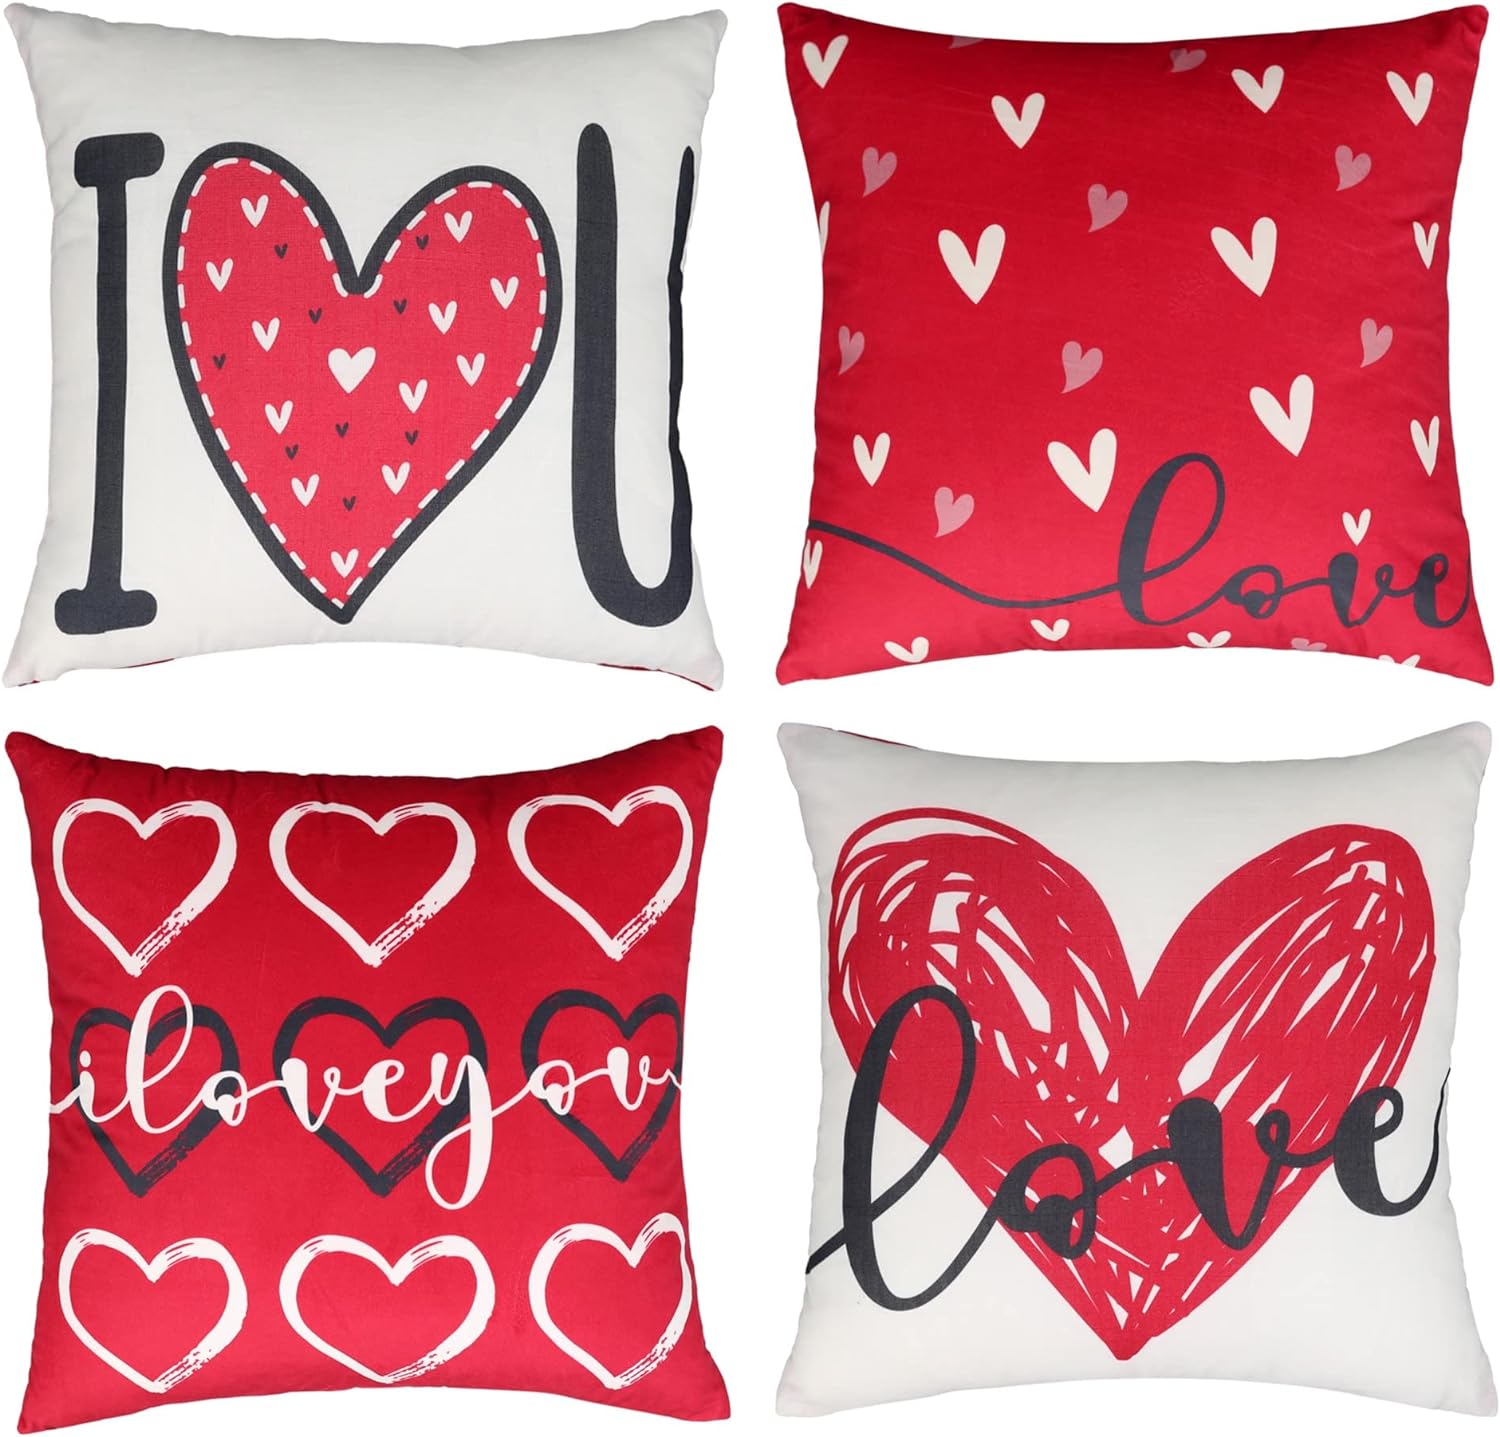 HPUK Set of 4 Valentine' Day Throw Pillow Covers, 18x18 inch Decorative Couch Pillows for Spring, Gift, Living Room, Bedroom, Sofa, Chair, Red